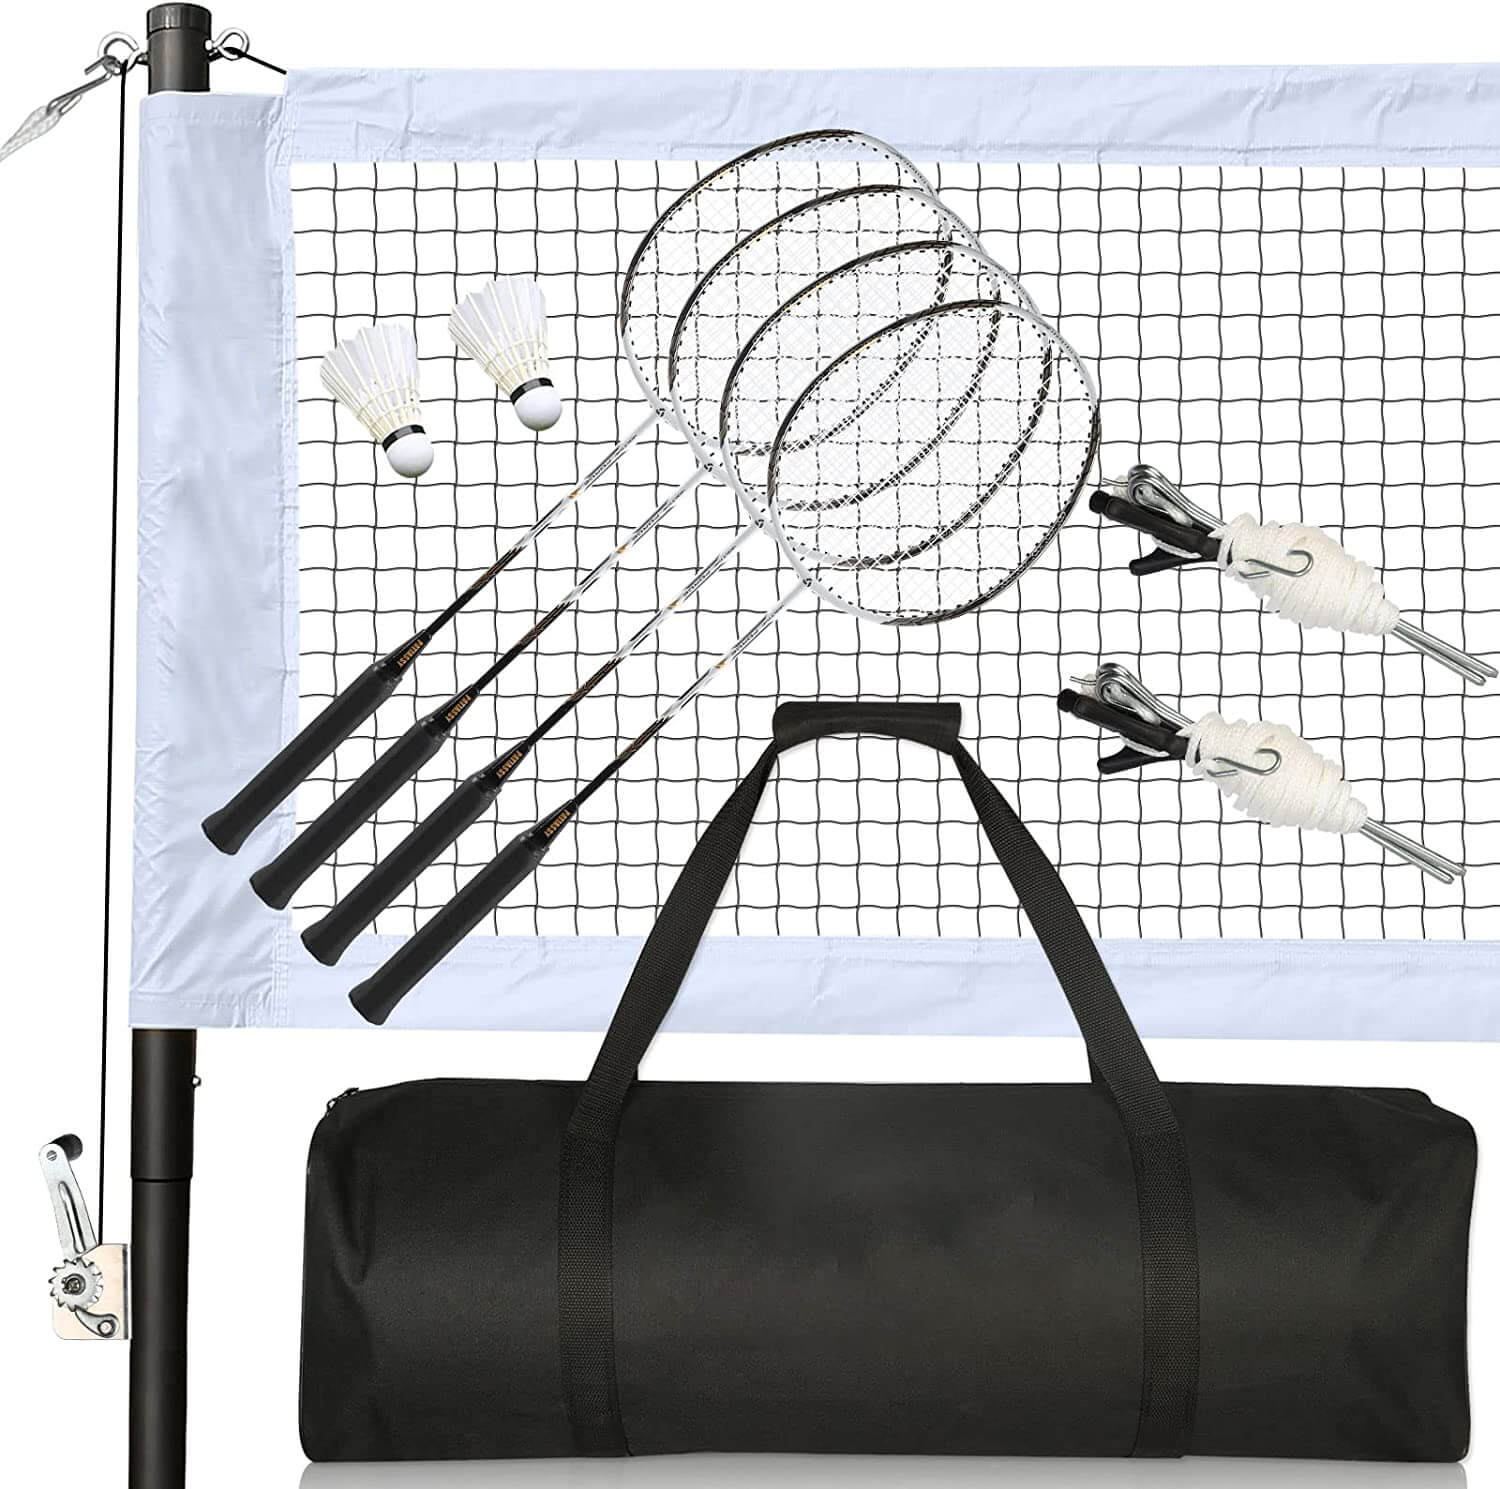 Patiassy Outdoor Portable Badminton Net Set with Winch System for Backyard Beach